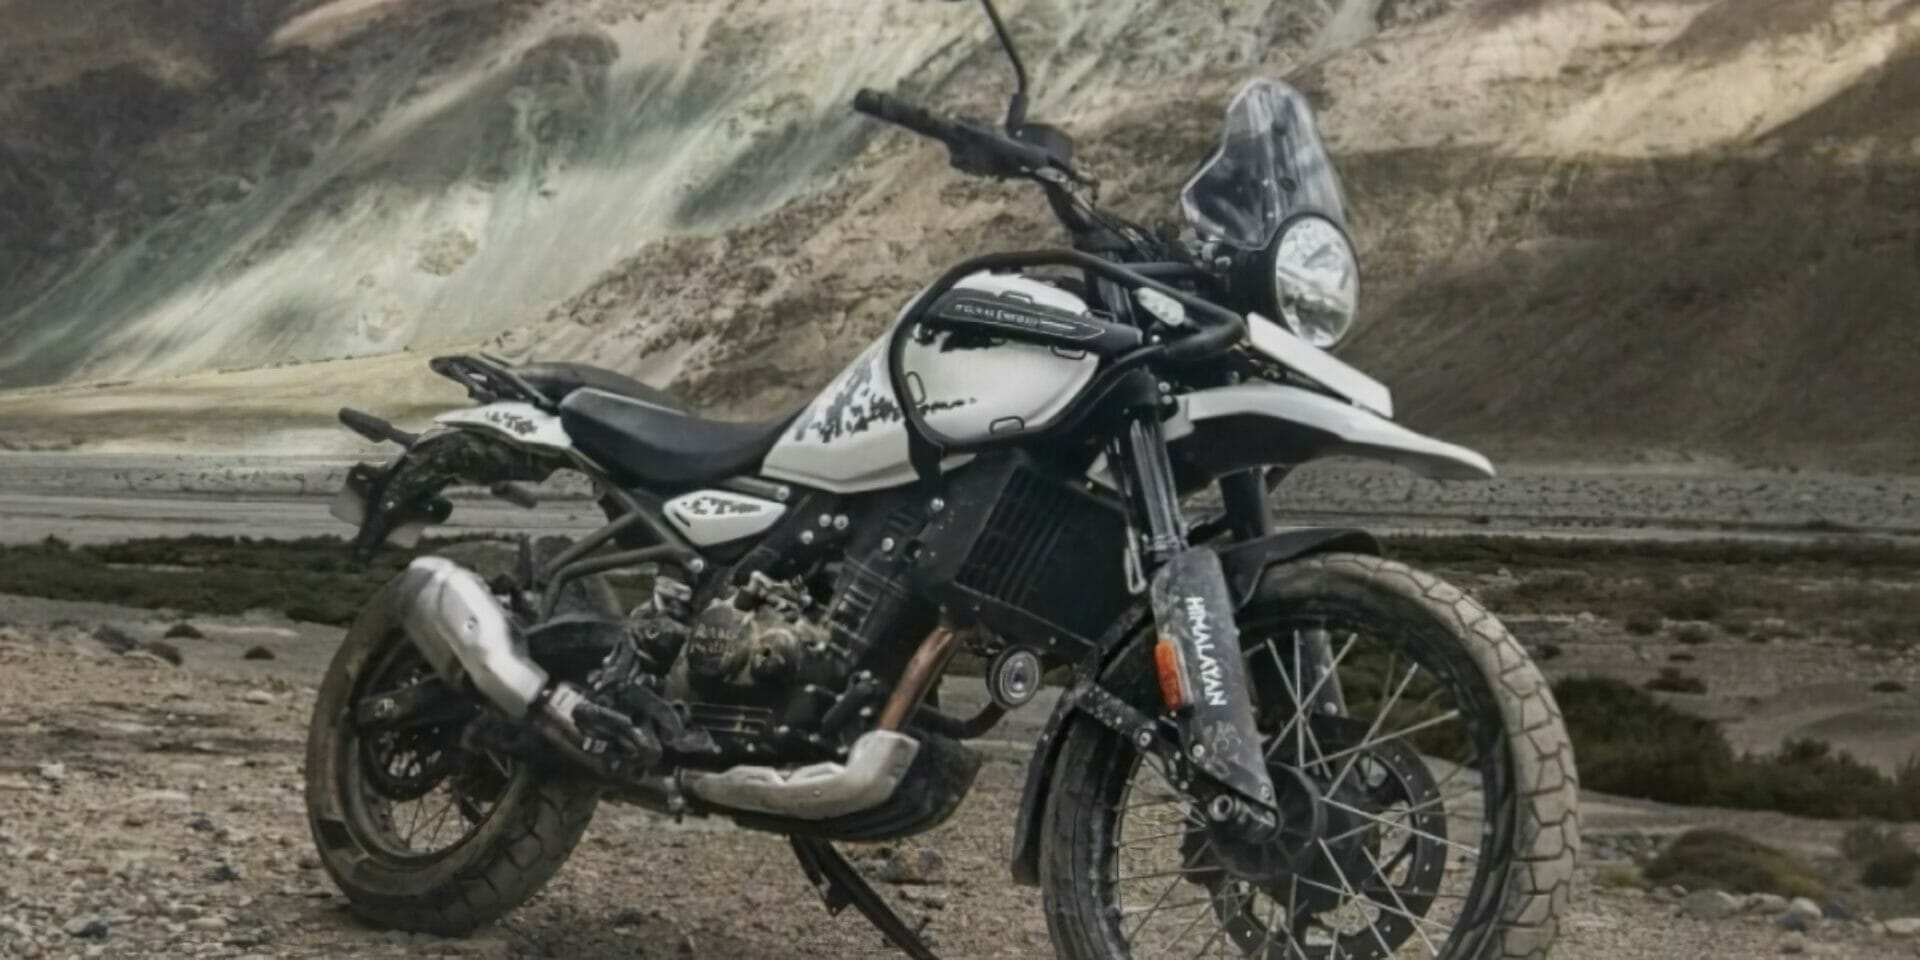 A preview of the Royal Enfield Himalayan 452: details and expectations.